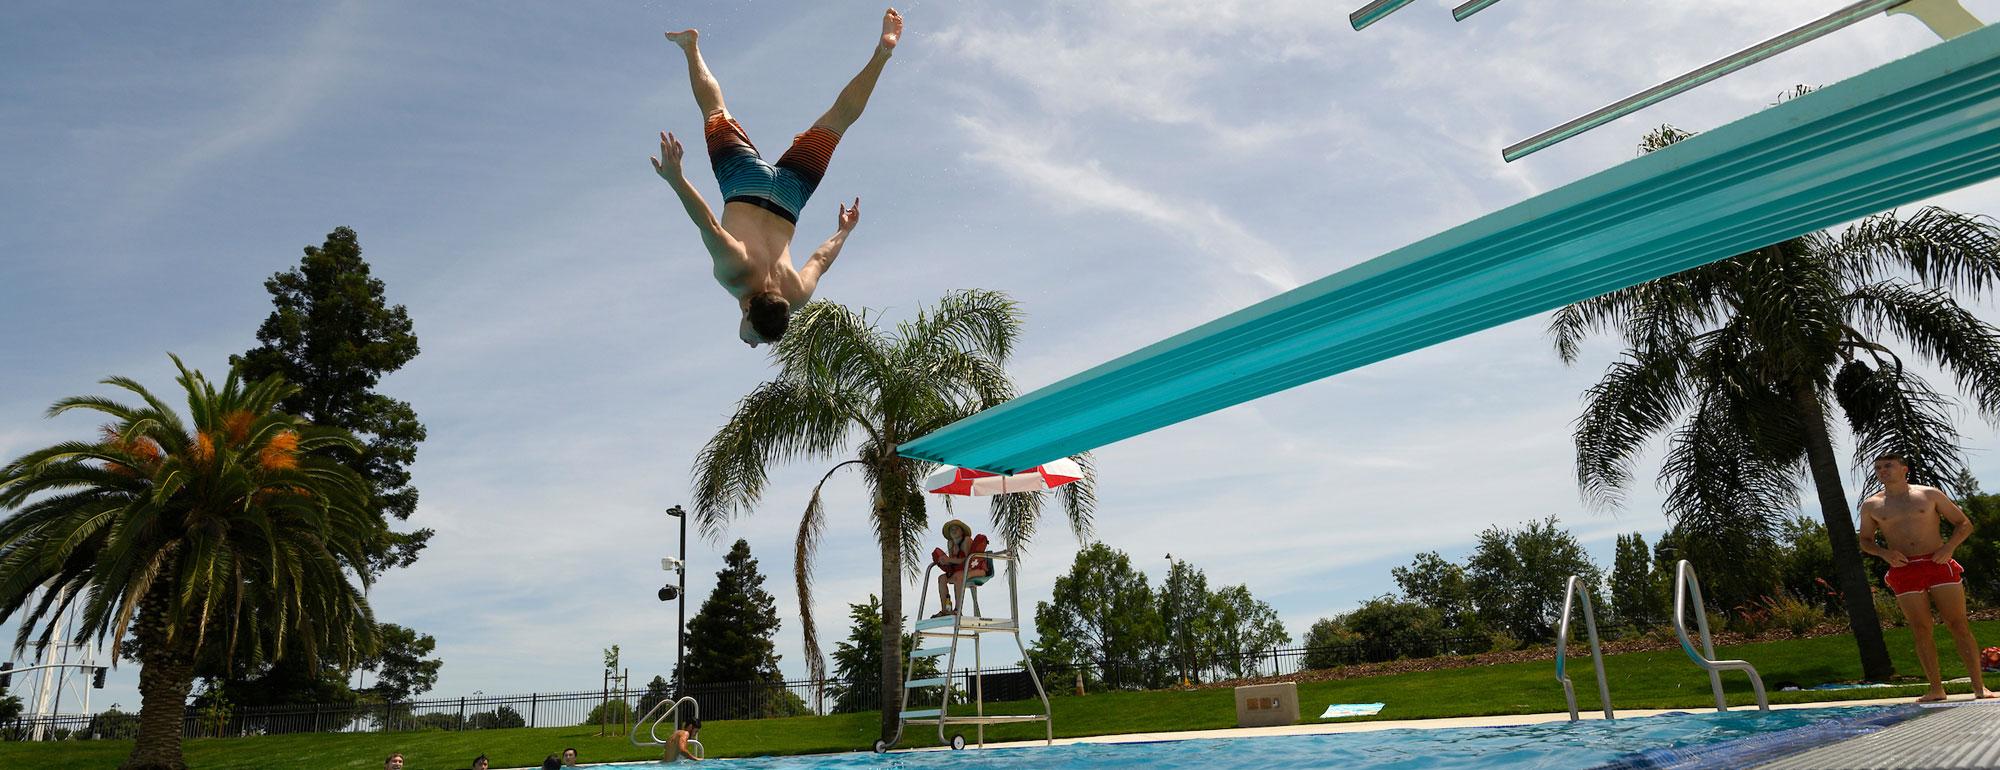 A student doing an acrobatic jump of of the diving board at the ֱ Recreation Pool